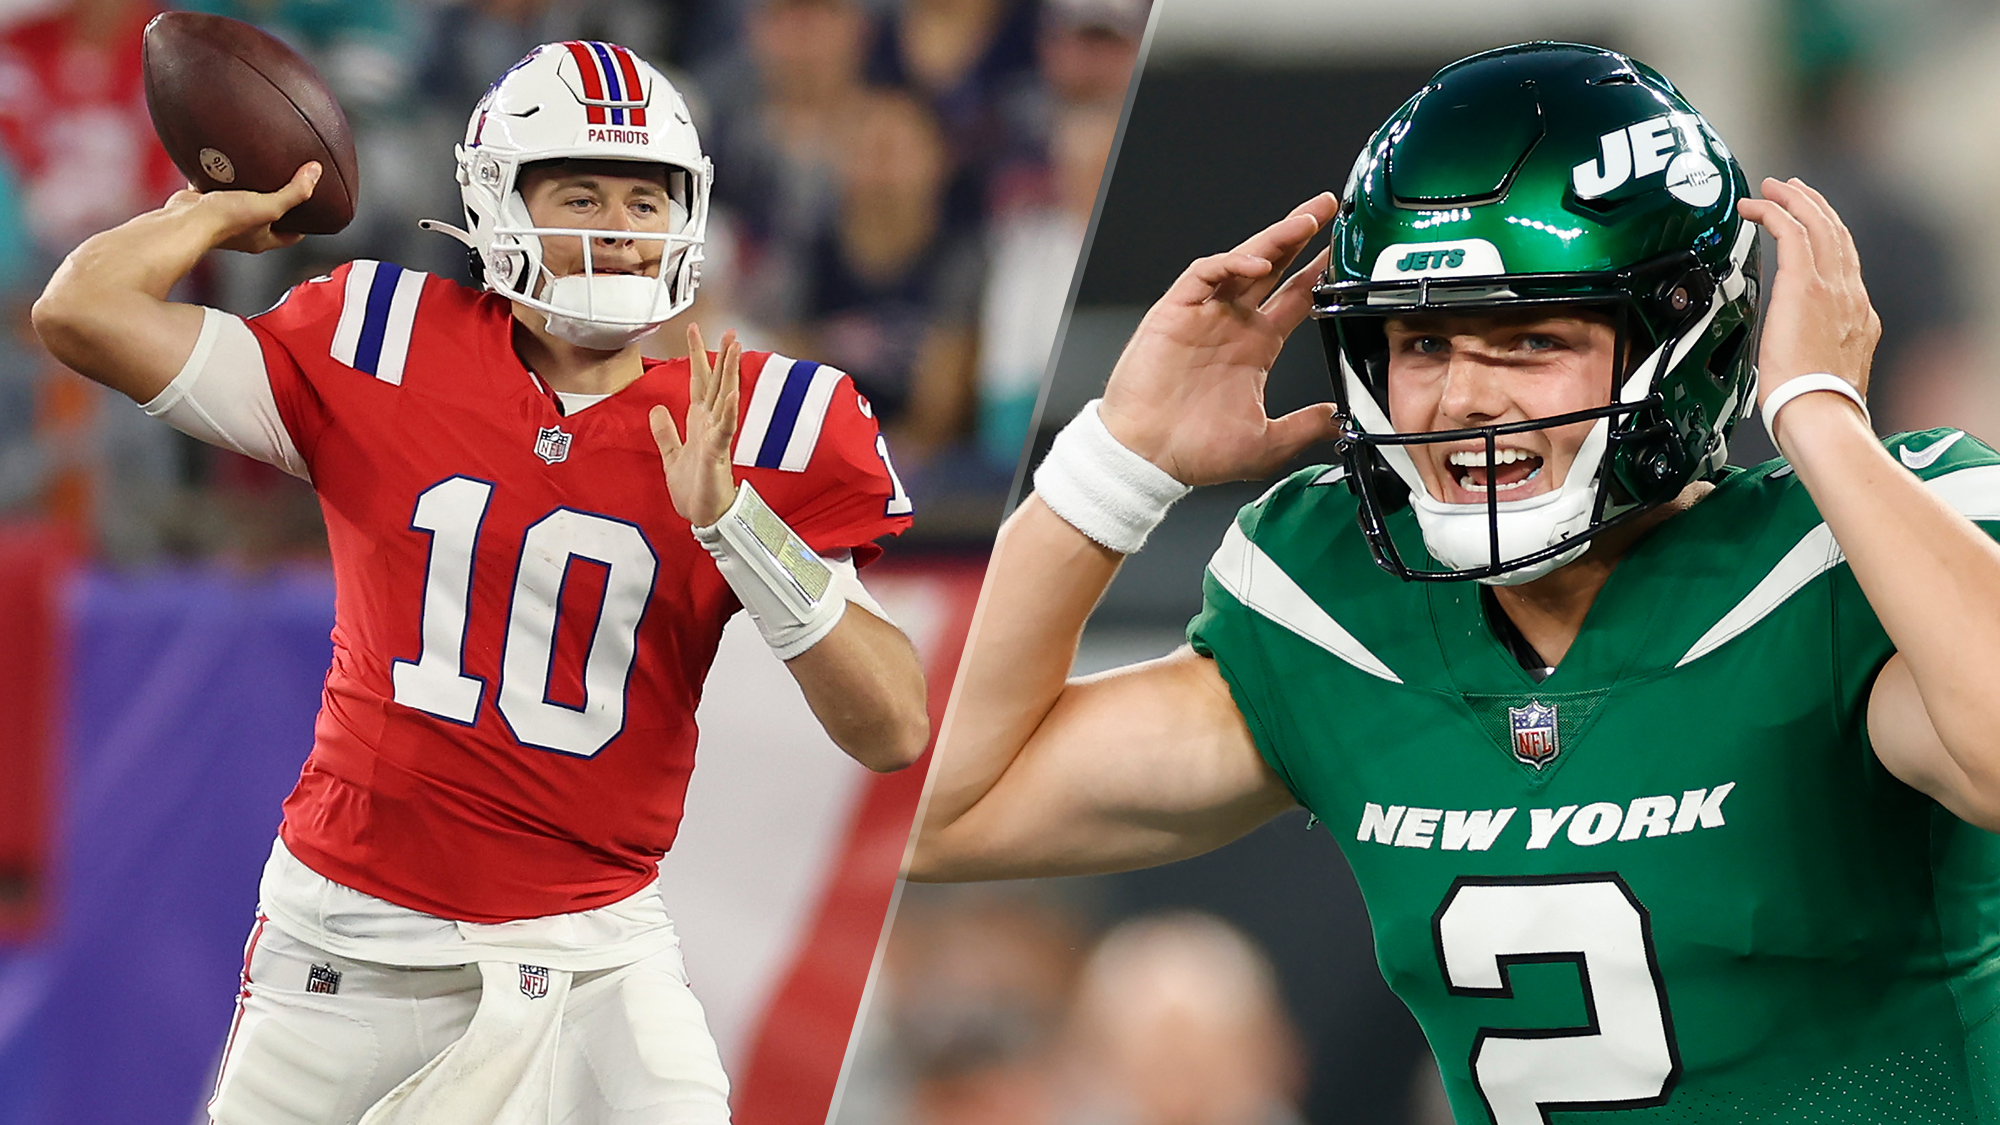 Patriots vs Jets live stream: How to watch NFL week 3 game online